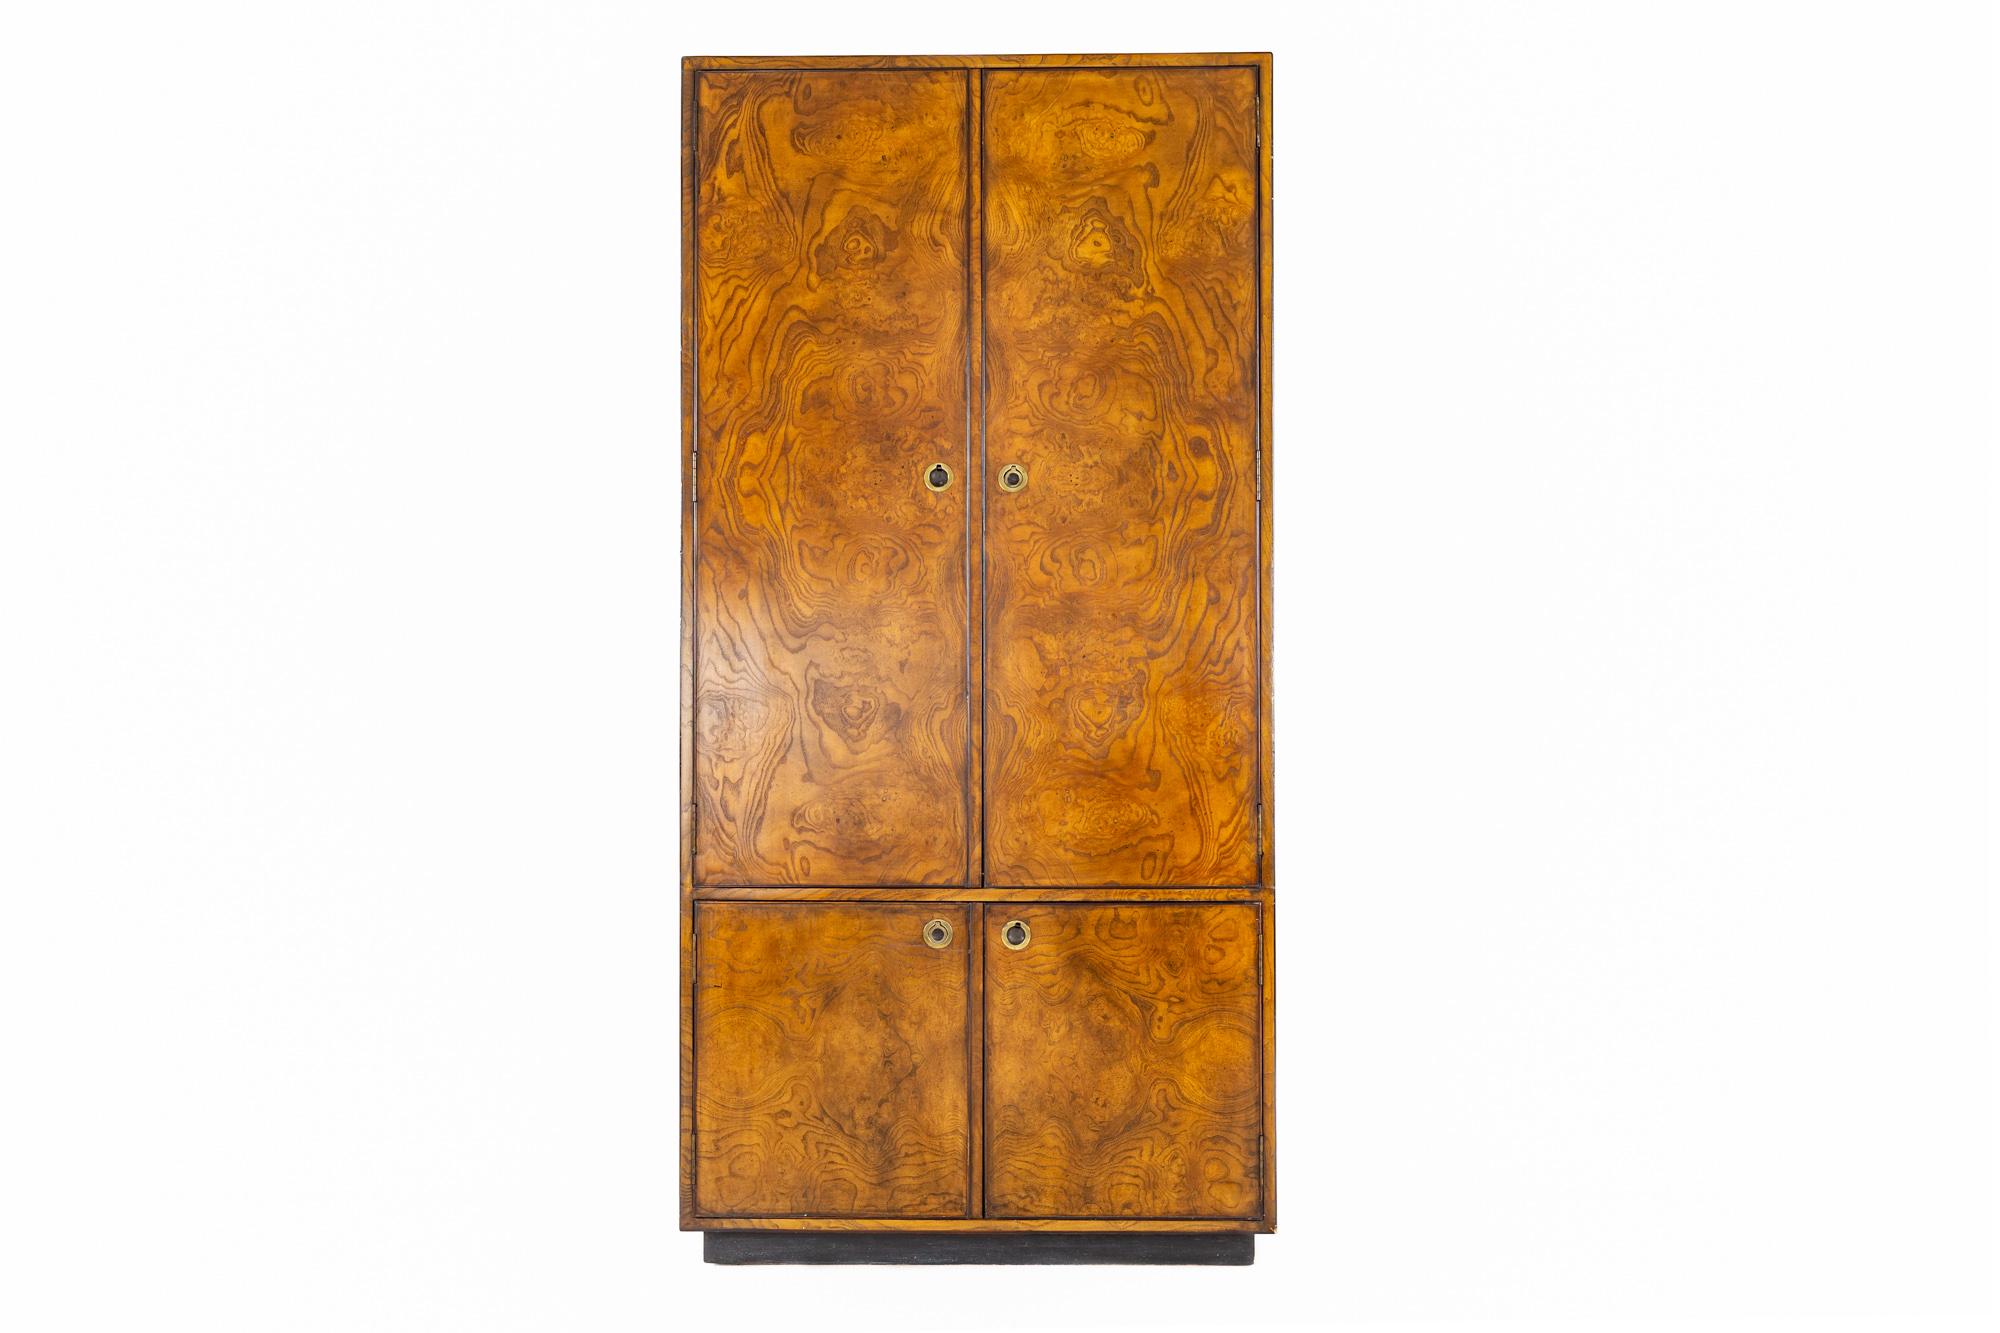 John Widdicomb mid century burlwood bar armoire

This armoire measures: 36 wide x 19 deep x 74 inches high

All pieces of furniture can be had in what we call restored vintage condition. That means the piece is restored upon purchase so it’s